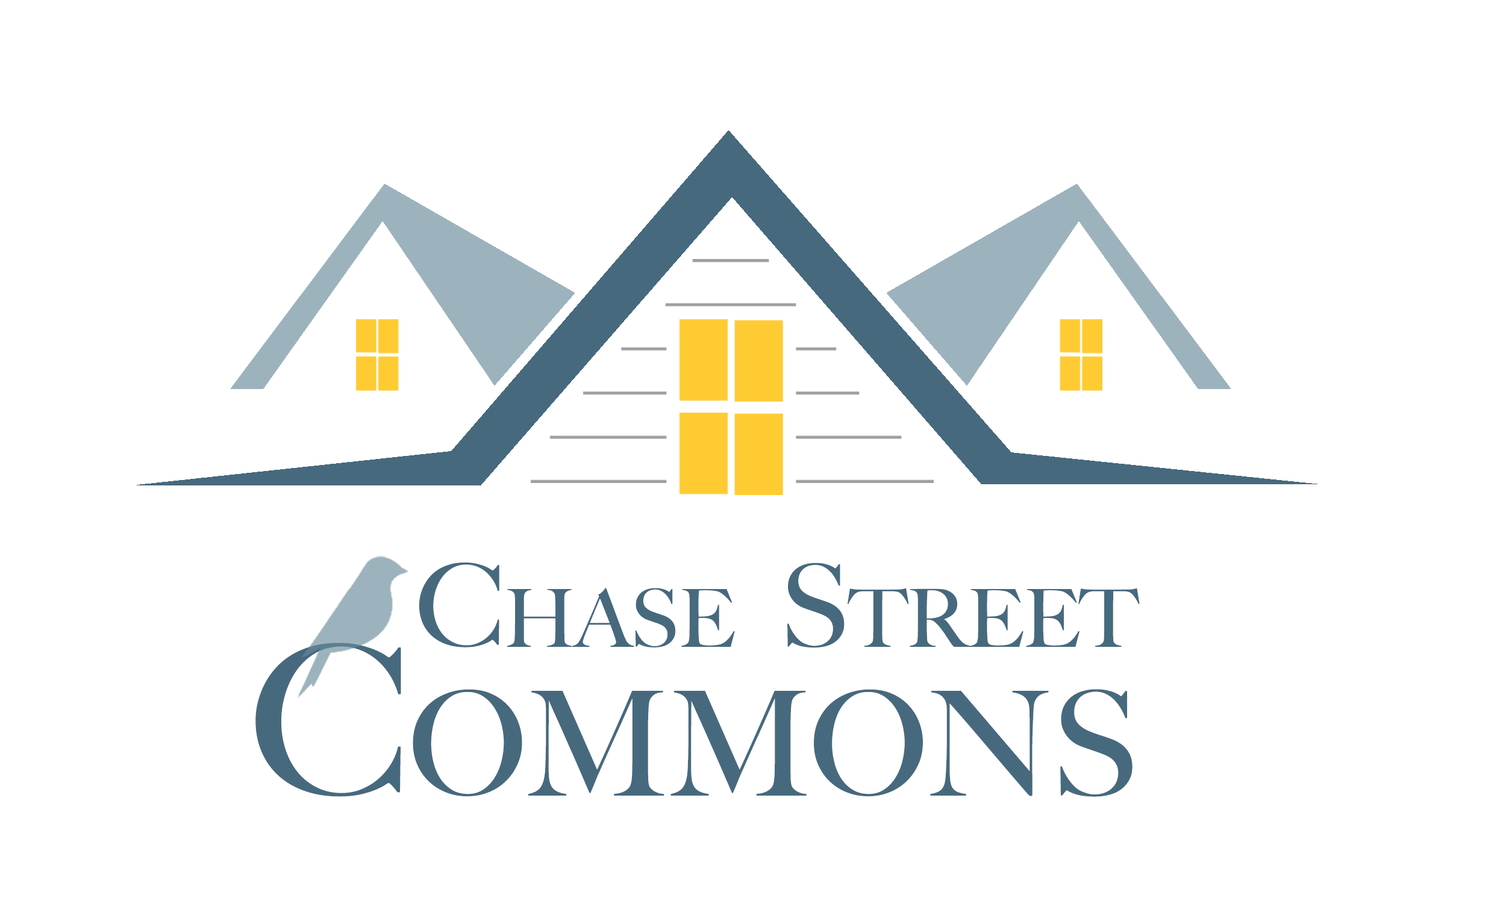 Chase Street Commons